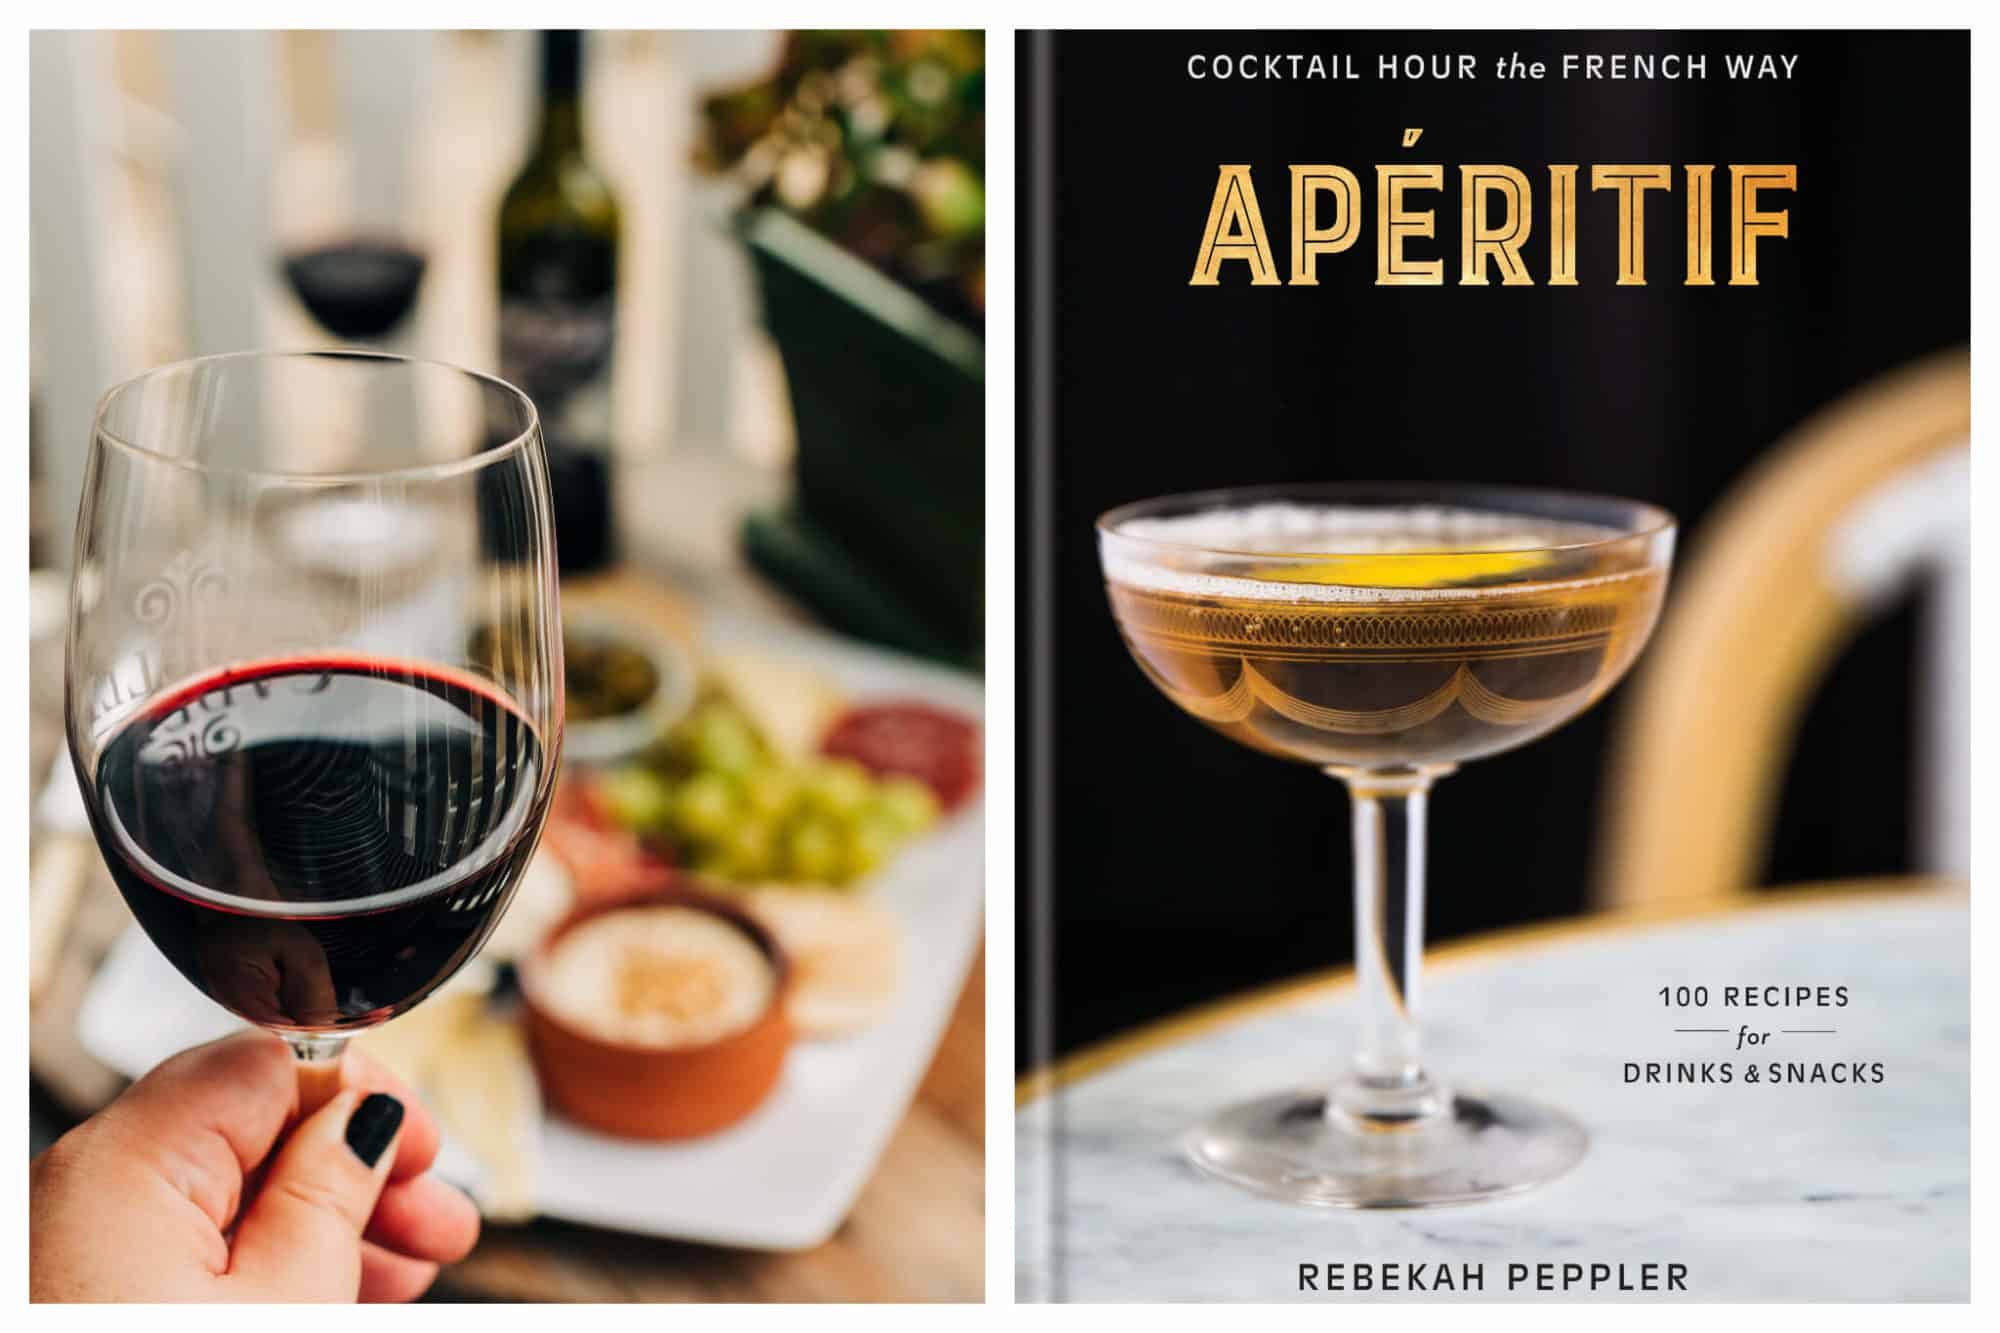 Left, a woman's hand holding up a glass of red wine to go with a ham and cheese platter at home during the Coronavirus. Right, the cover of Rebekah Peppler's book 'Apéritif' for making cocktails at home during self-isolation.